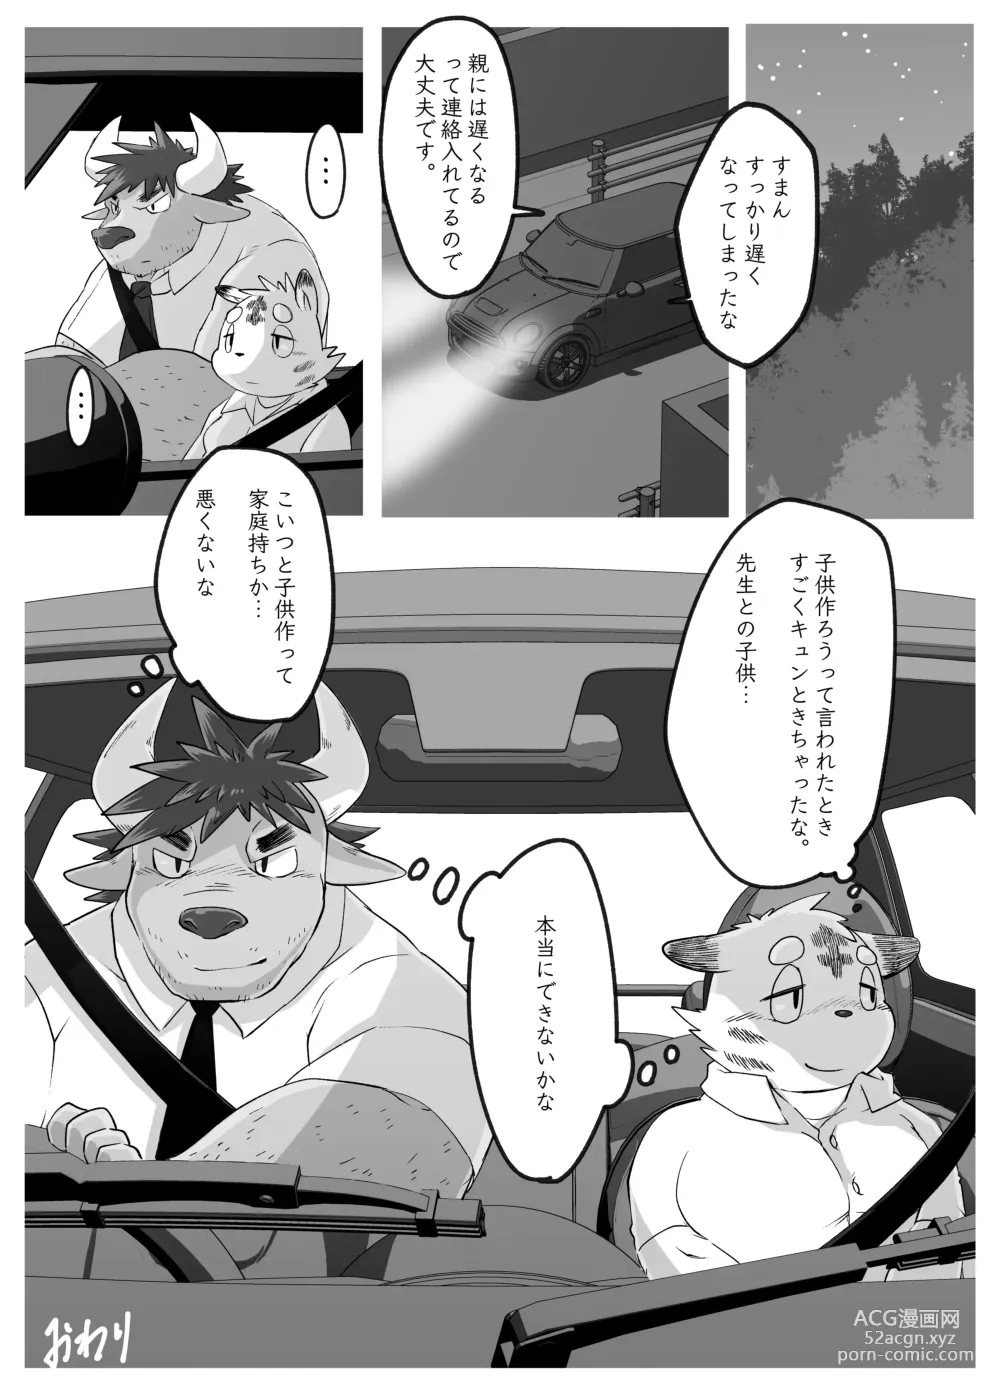 Page 18 of doujinshi Muscular Bull Teacher & Chubby Tiger Student 2